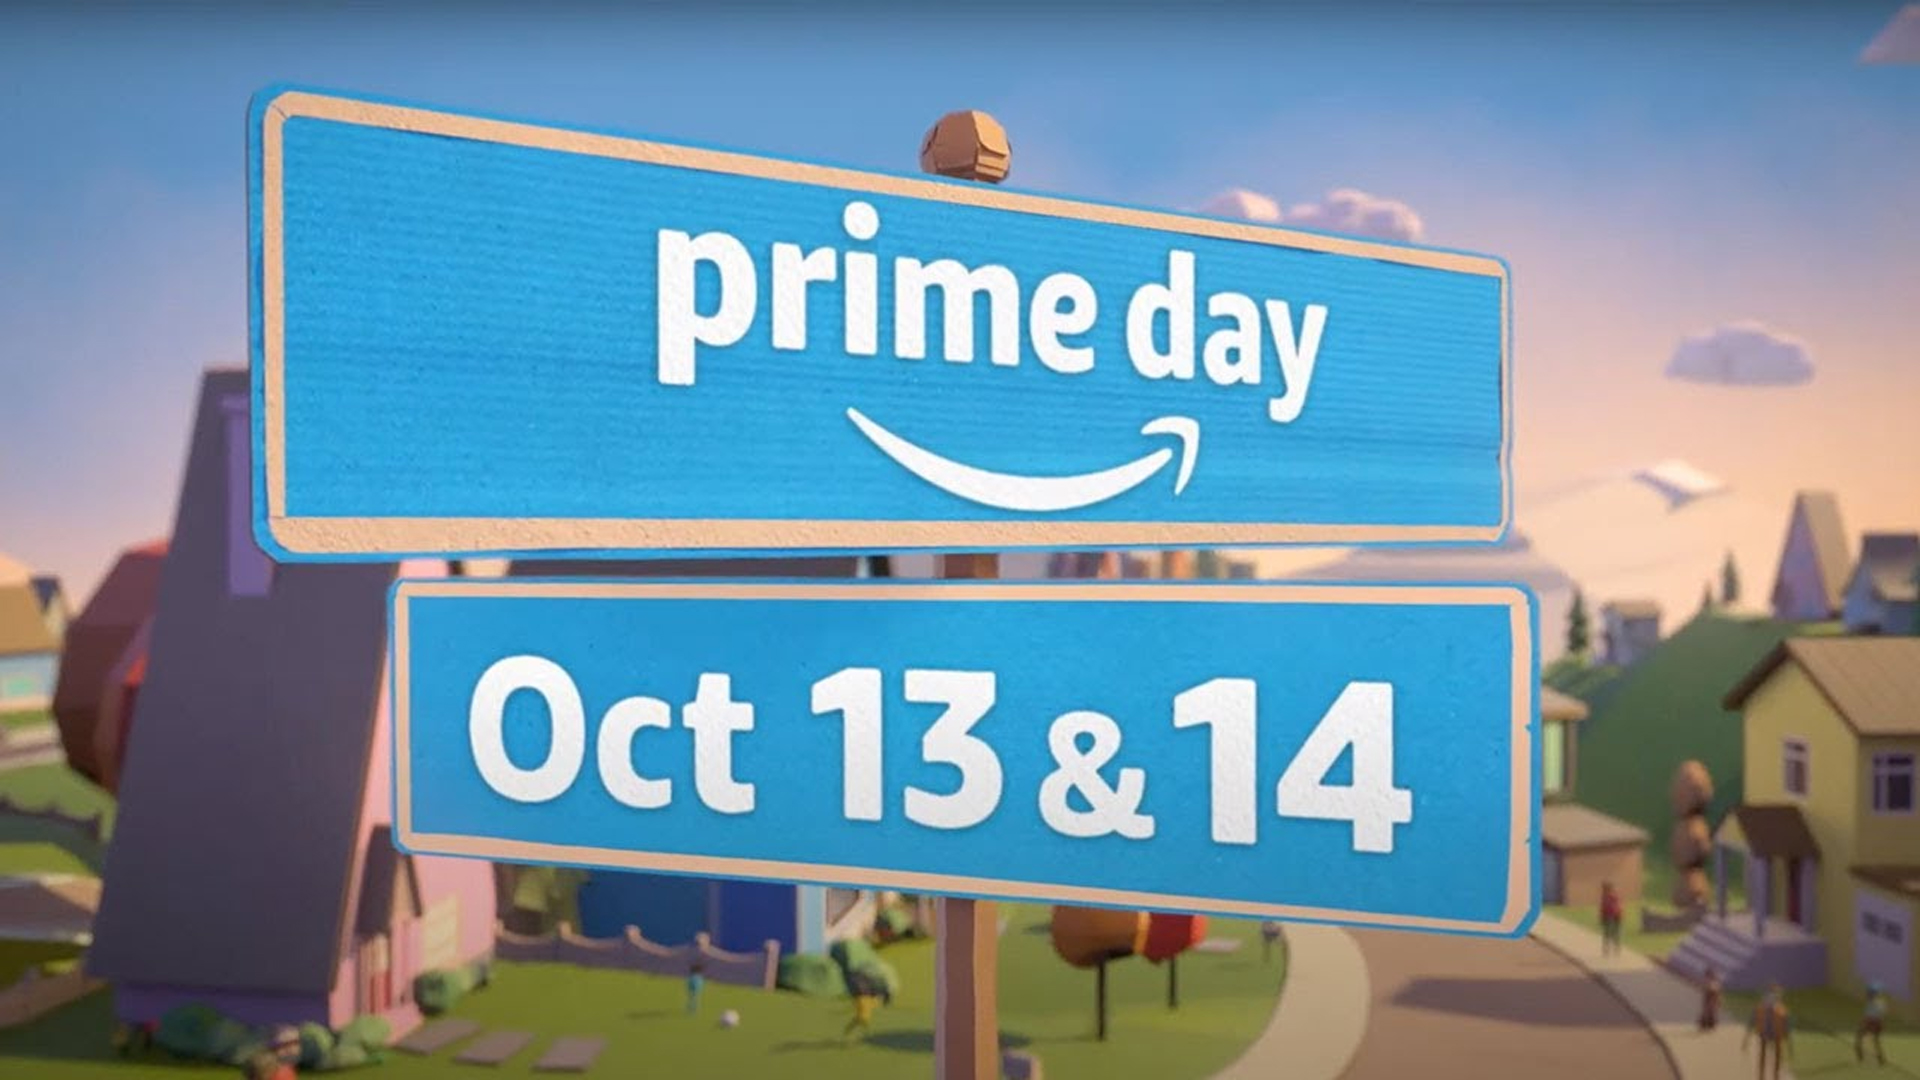 Amazon Prime Day In Could Be Better Than Black Friday This Year 21